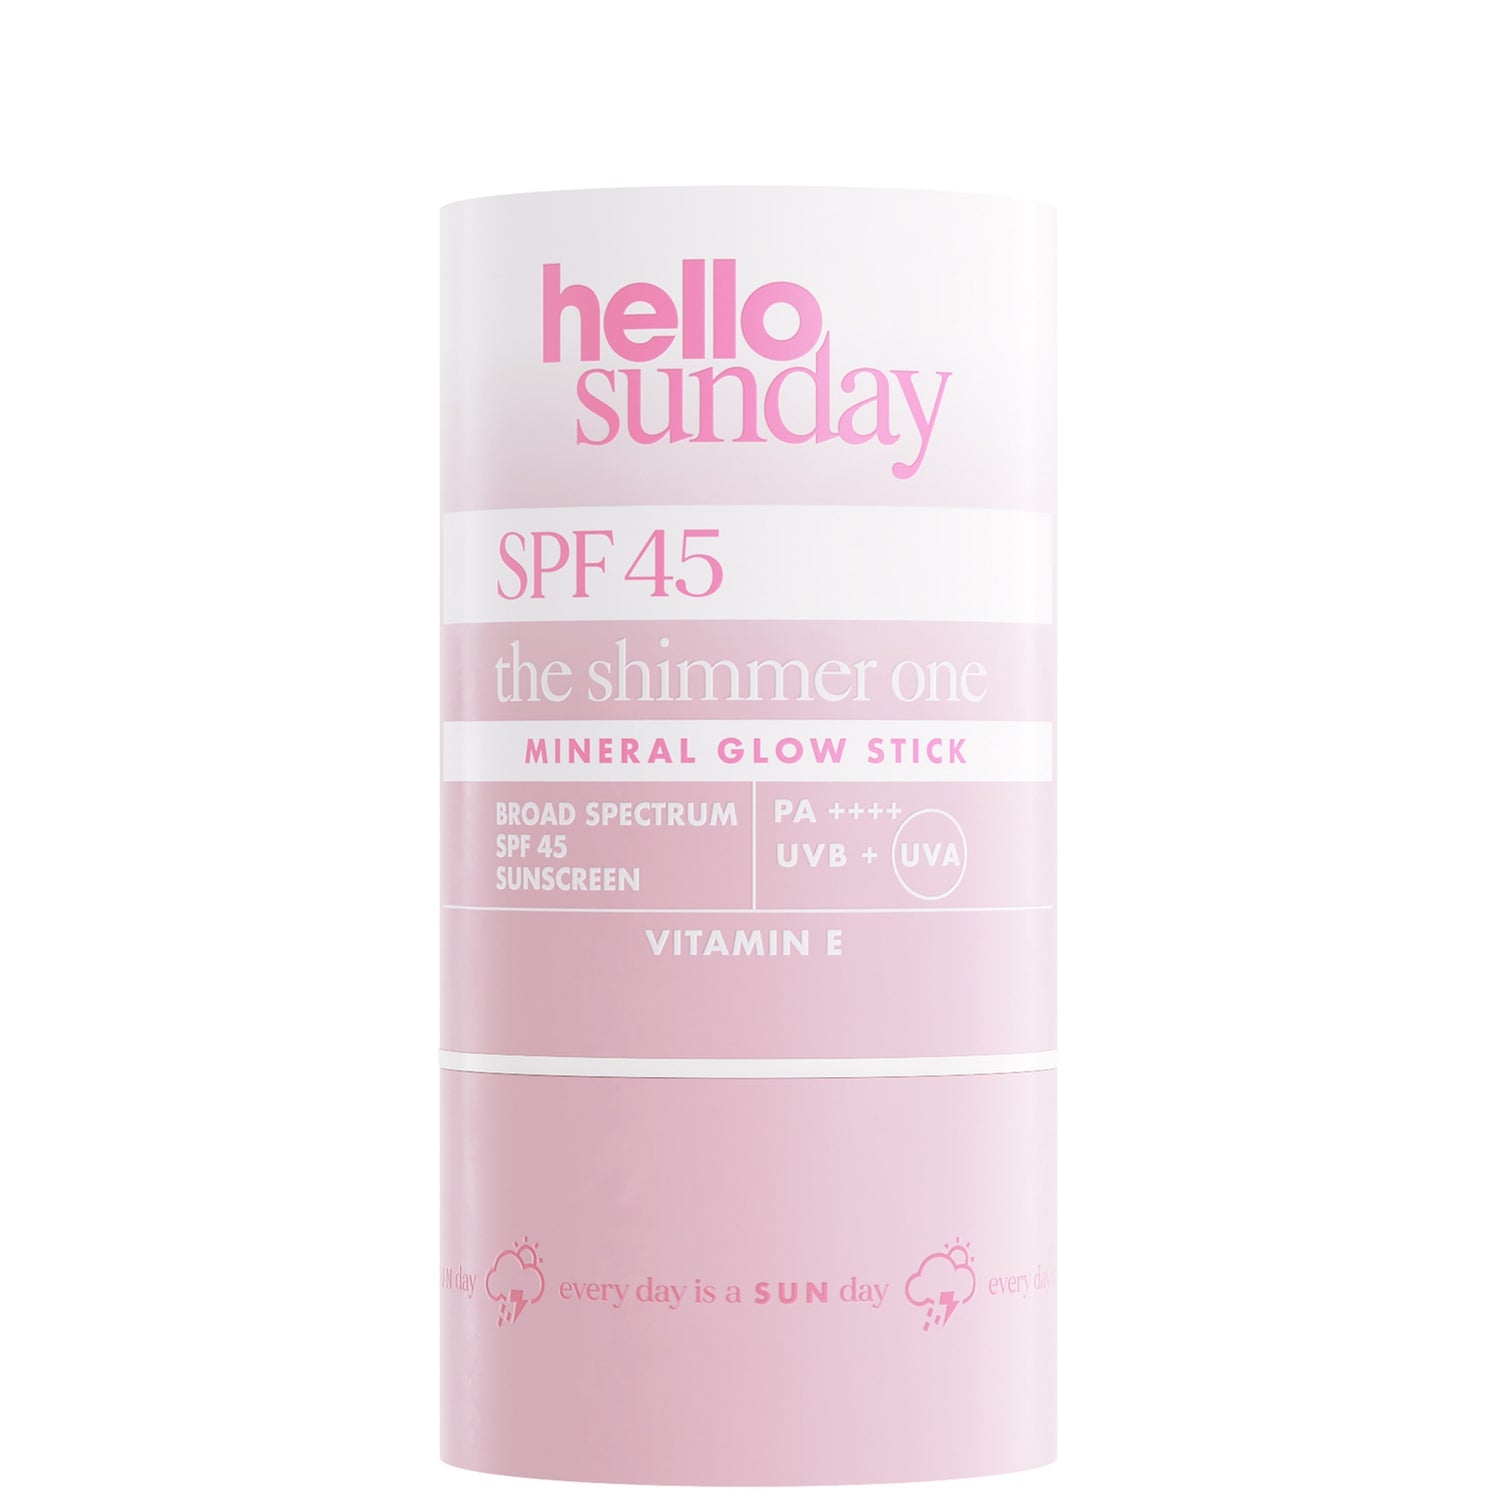 Hello Sunday the Shimmer One Mineral Glow Stick SPF45 20g